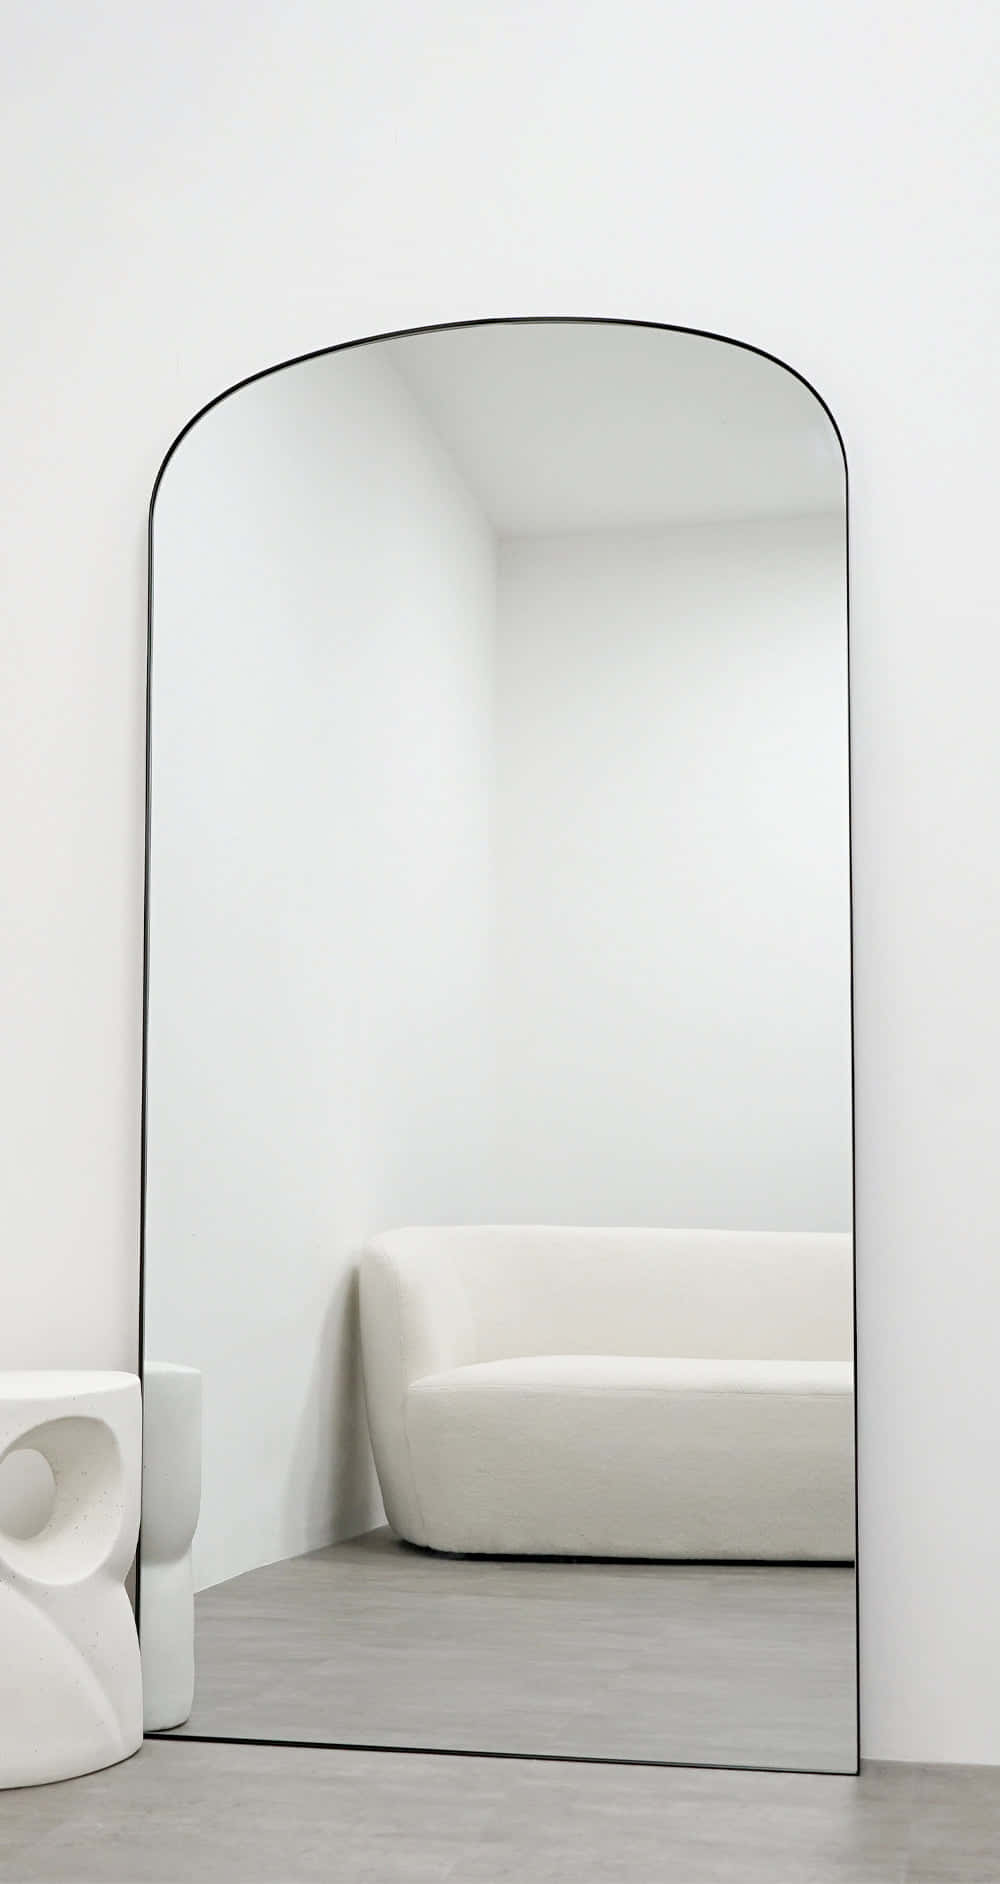 A White Couch And Mirror In A Room